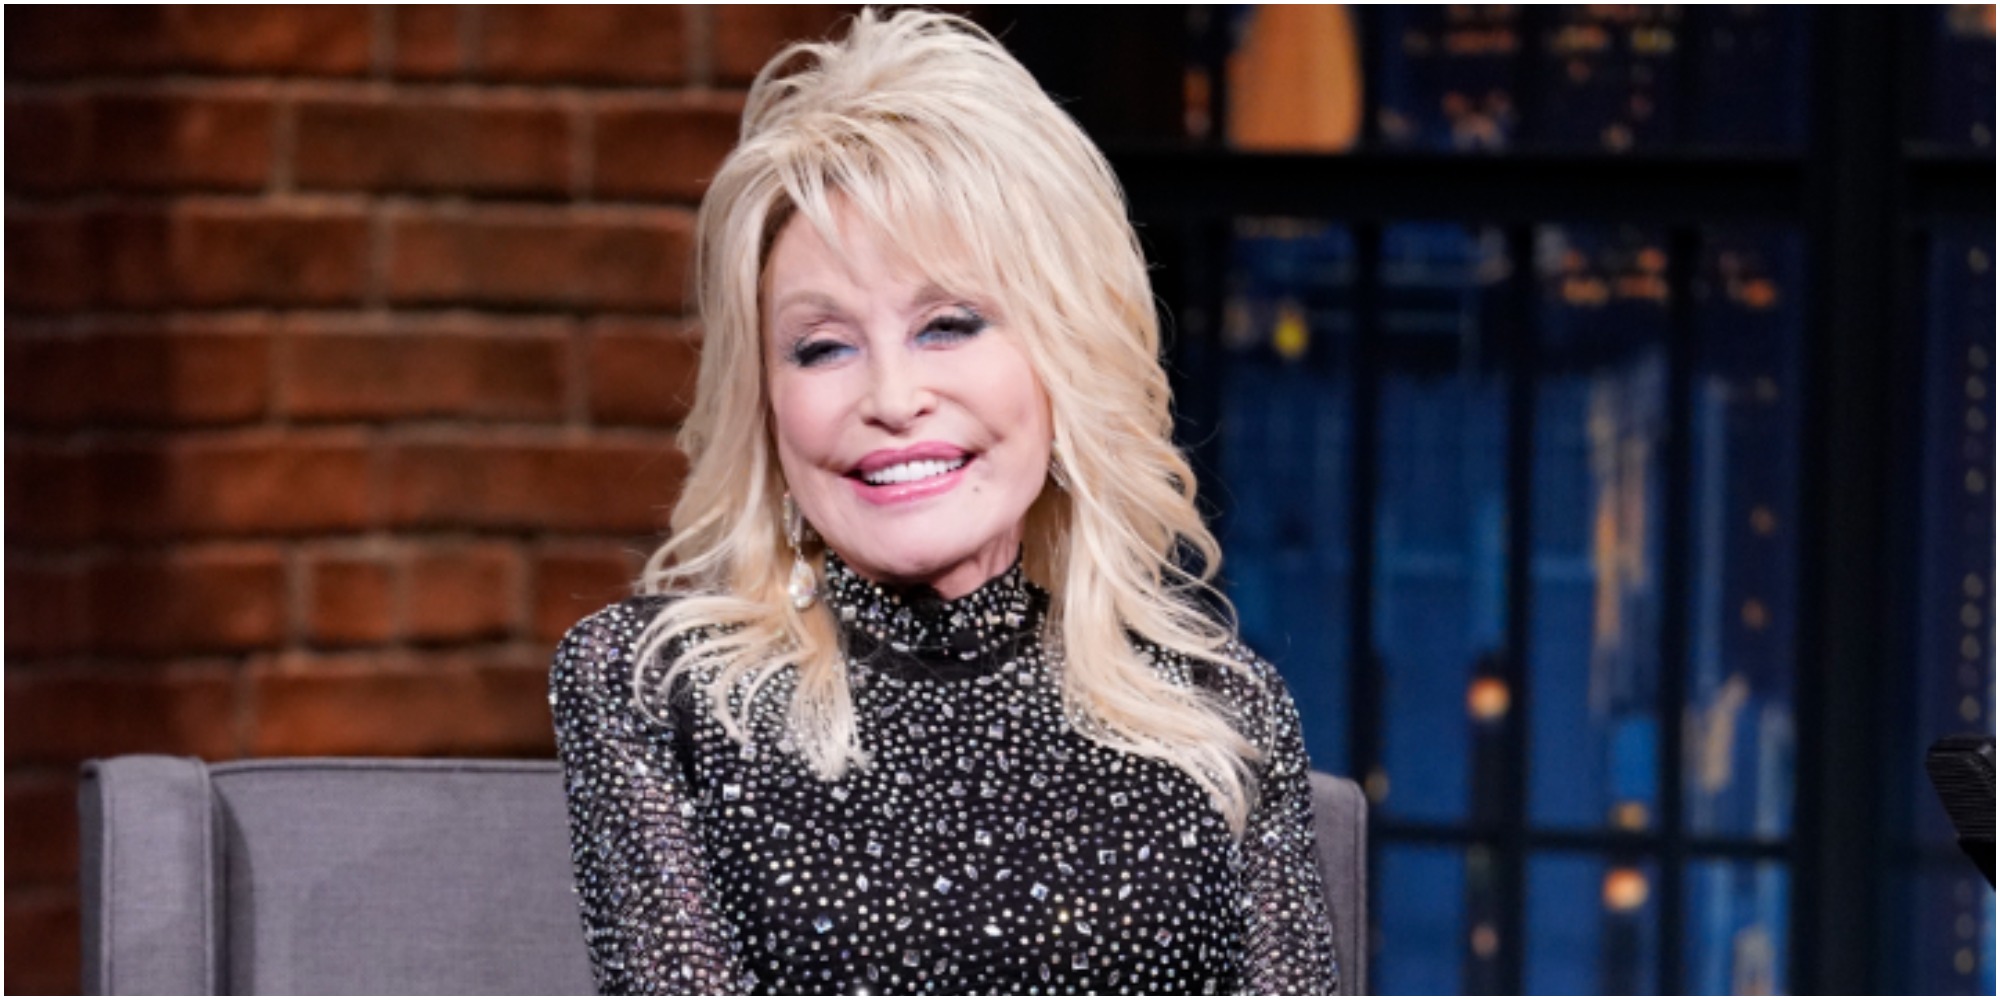 Dolly Parton will present an Emmy Award during the 2021 show.